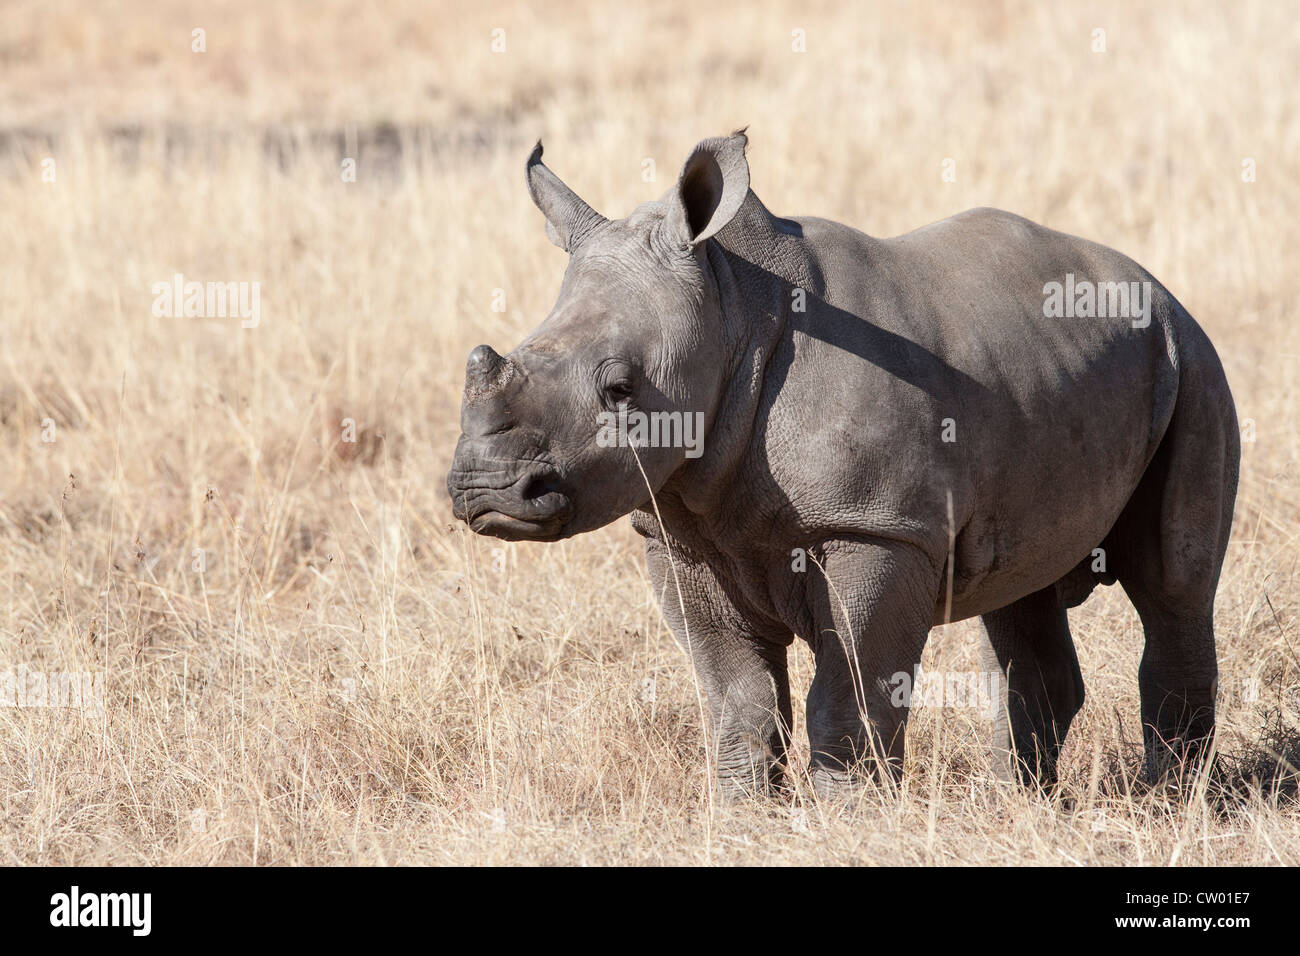 White rhino calf (Ceratotherium simum), Elandslaagte game ranch, North Western province, South Africa Stock Photo